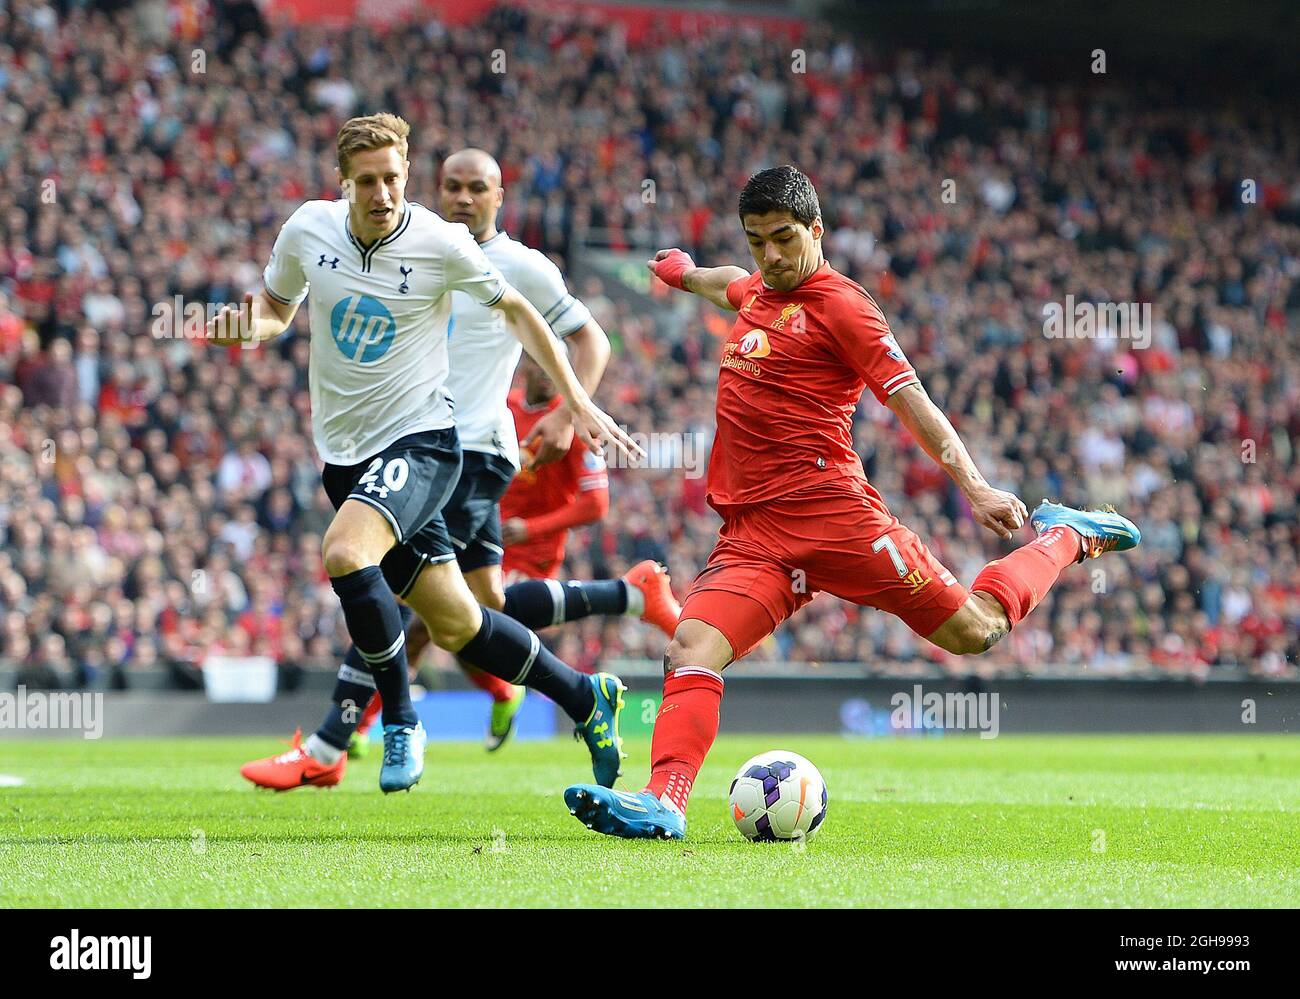 Luis Suarez of Liverpool scores the second goal during the Barclays Premier League match between Liverpool and Tottenham at the Anfield Stadium in Liverpool, England on March 30, 2014. Stock Photo